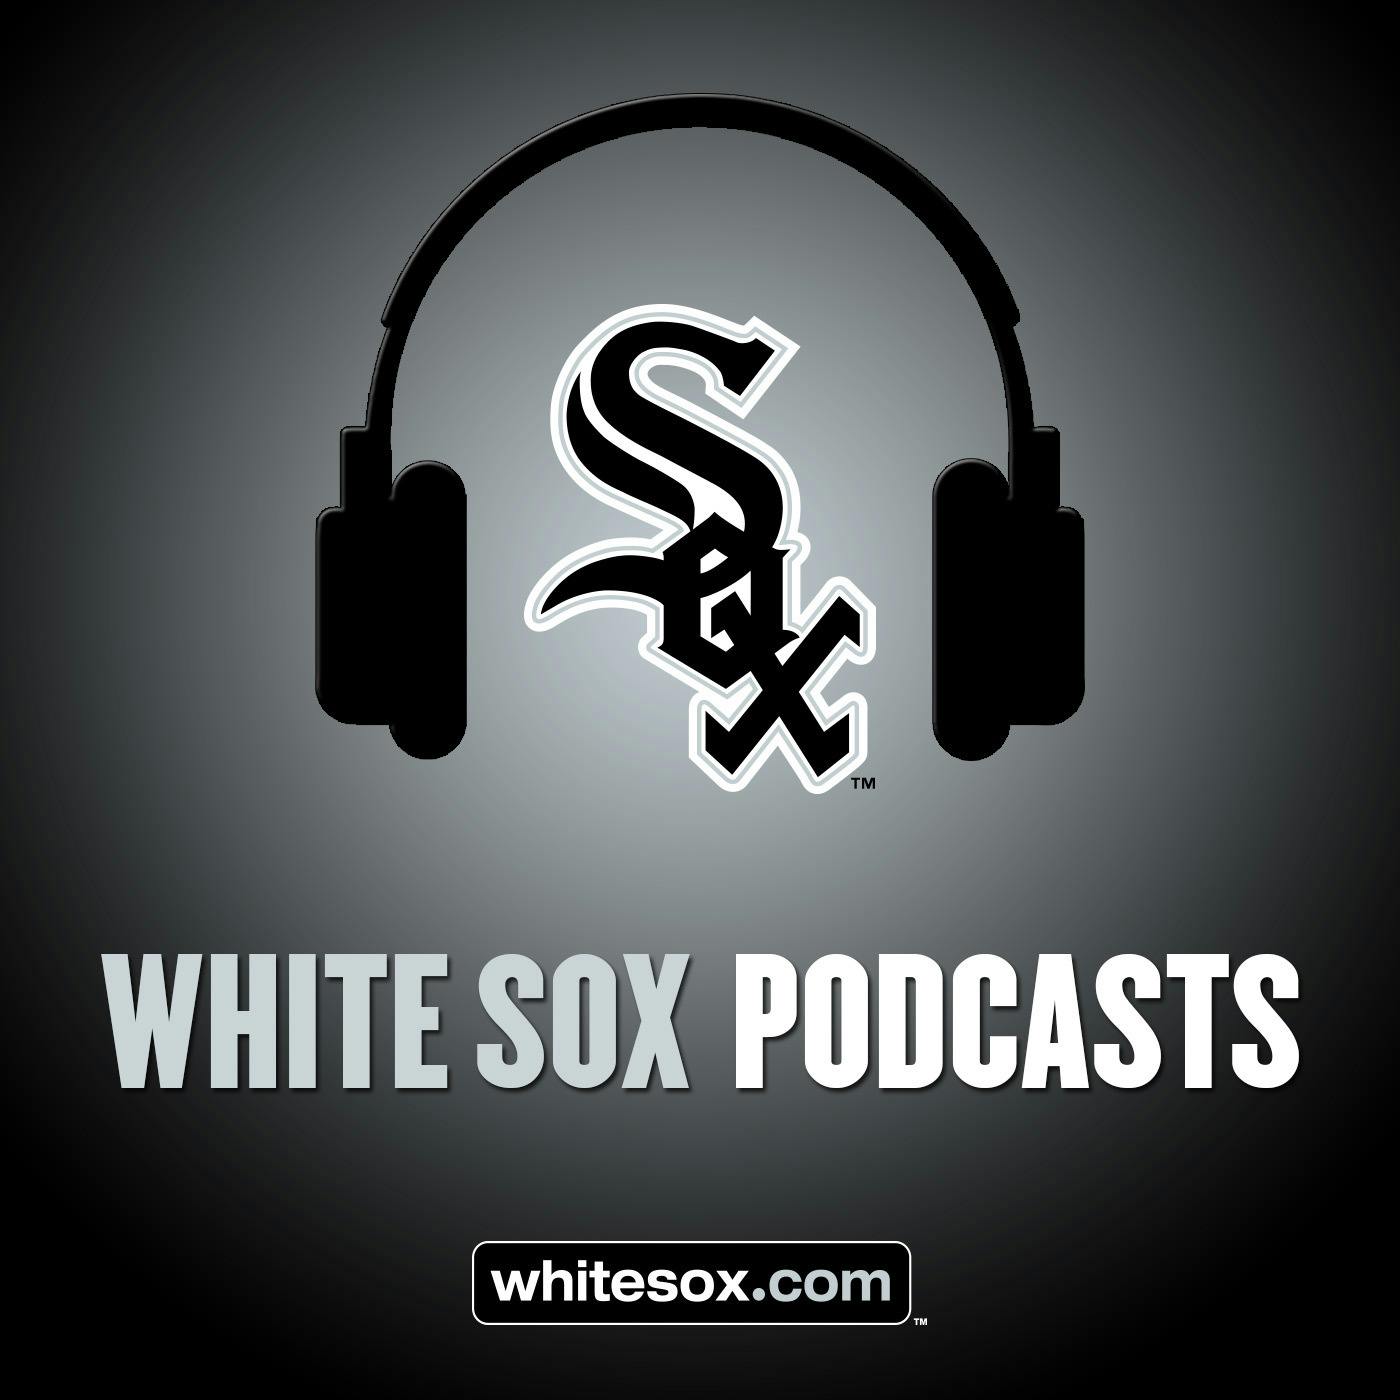 2/11/18: White Sox Weekly